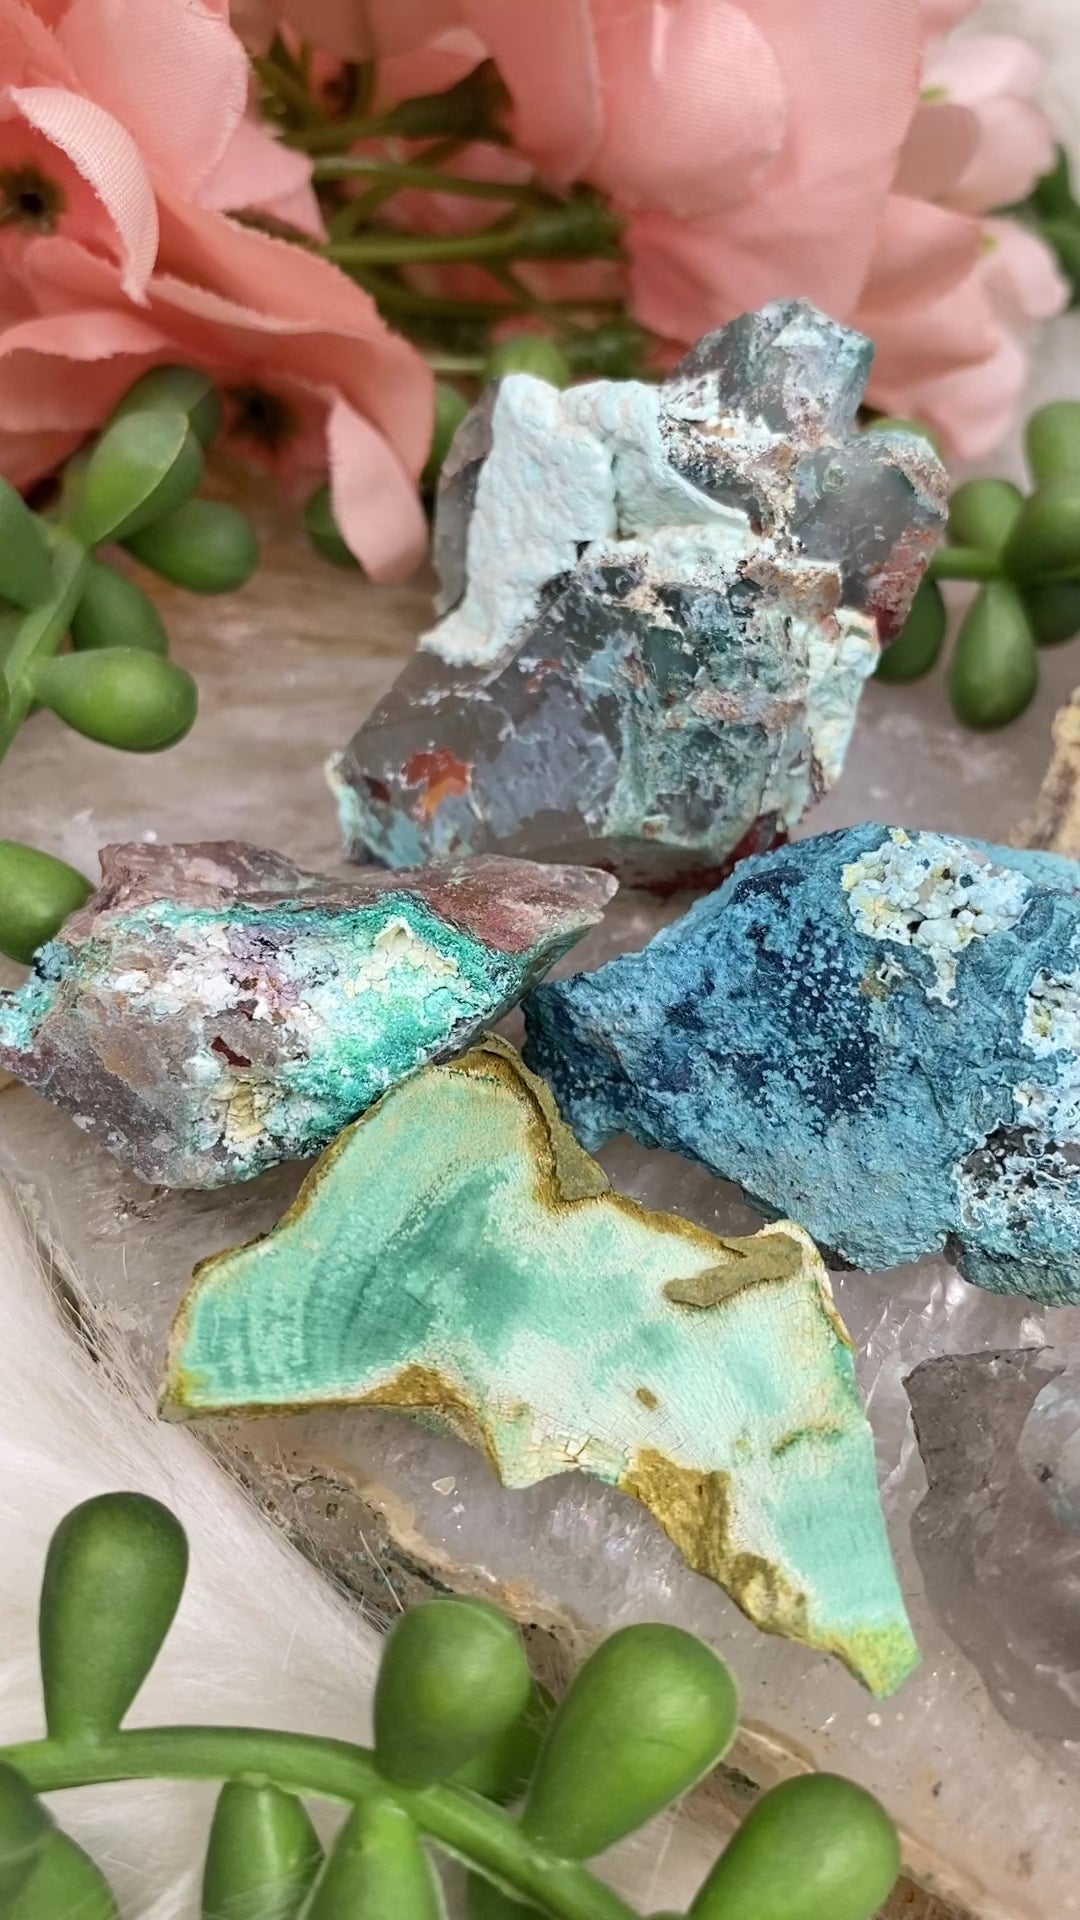 blue-crystal-specimens-from-namibia